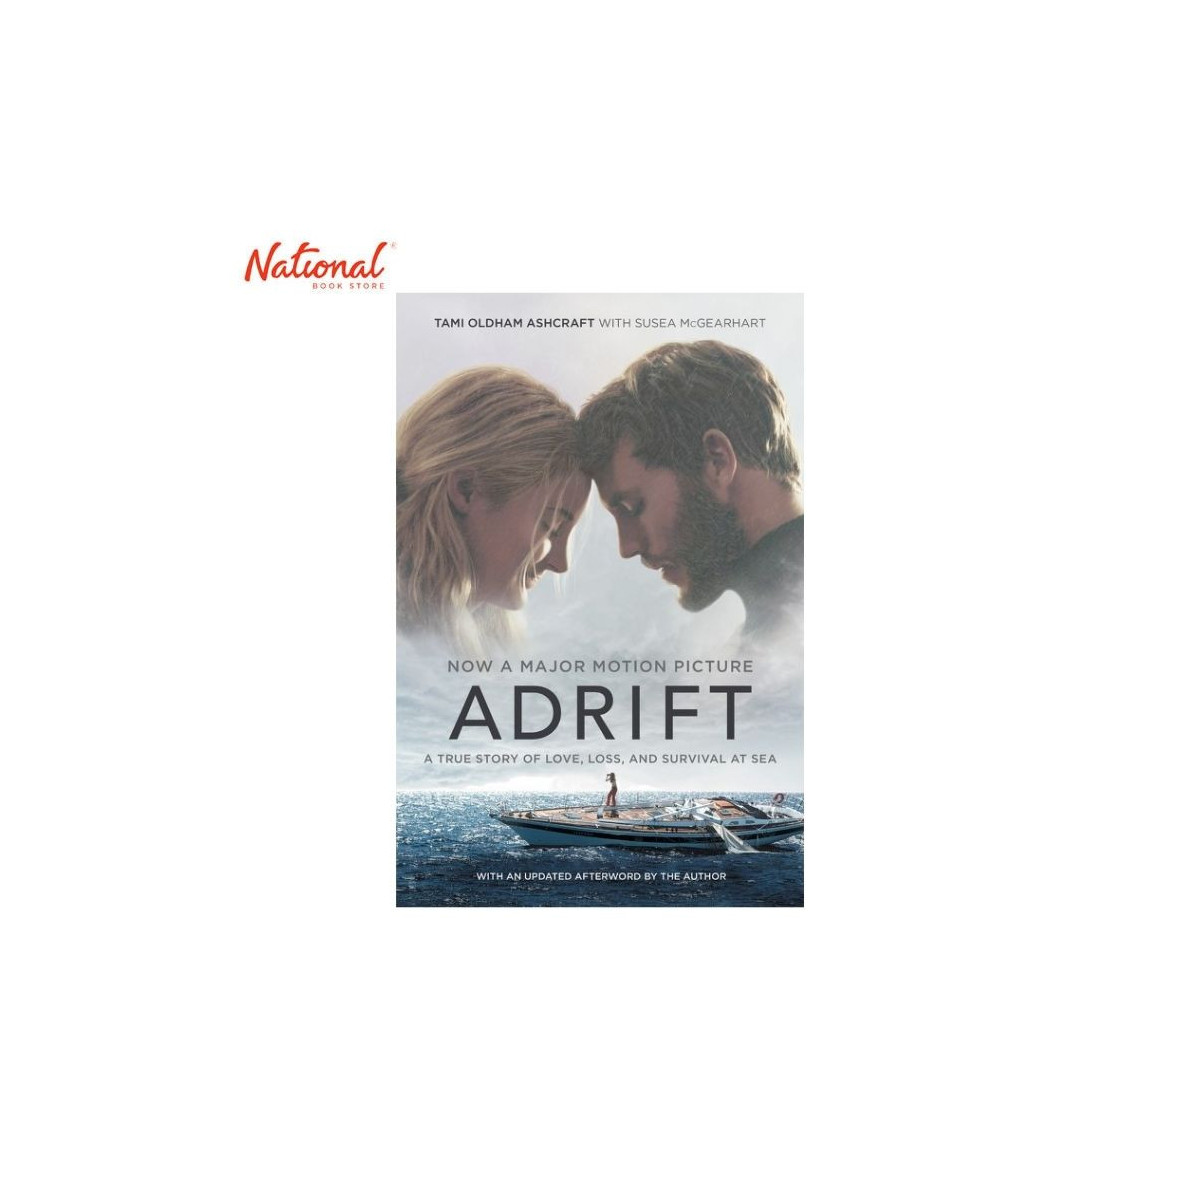 Adrift: A True Story of Love, Loss, and Survival at Sea Trade Paperback by Tami Oldham Ashcraft